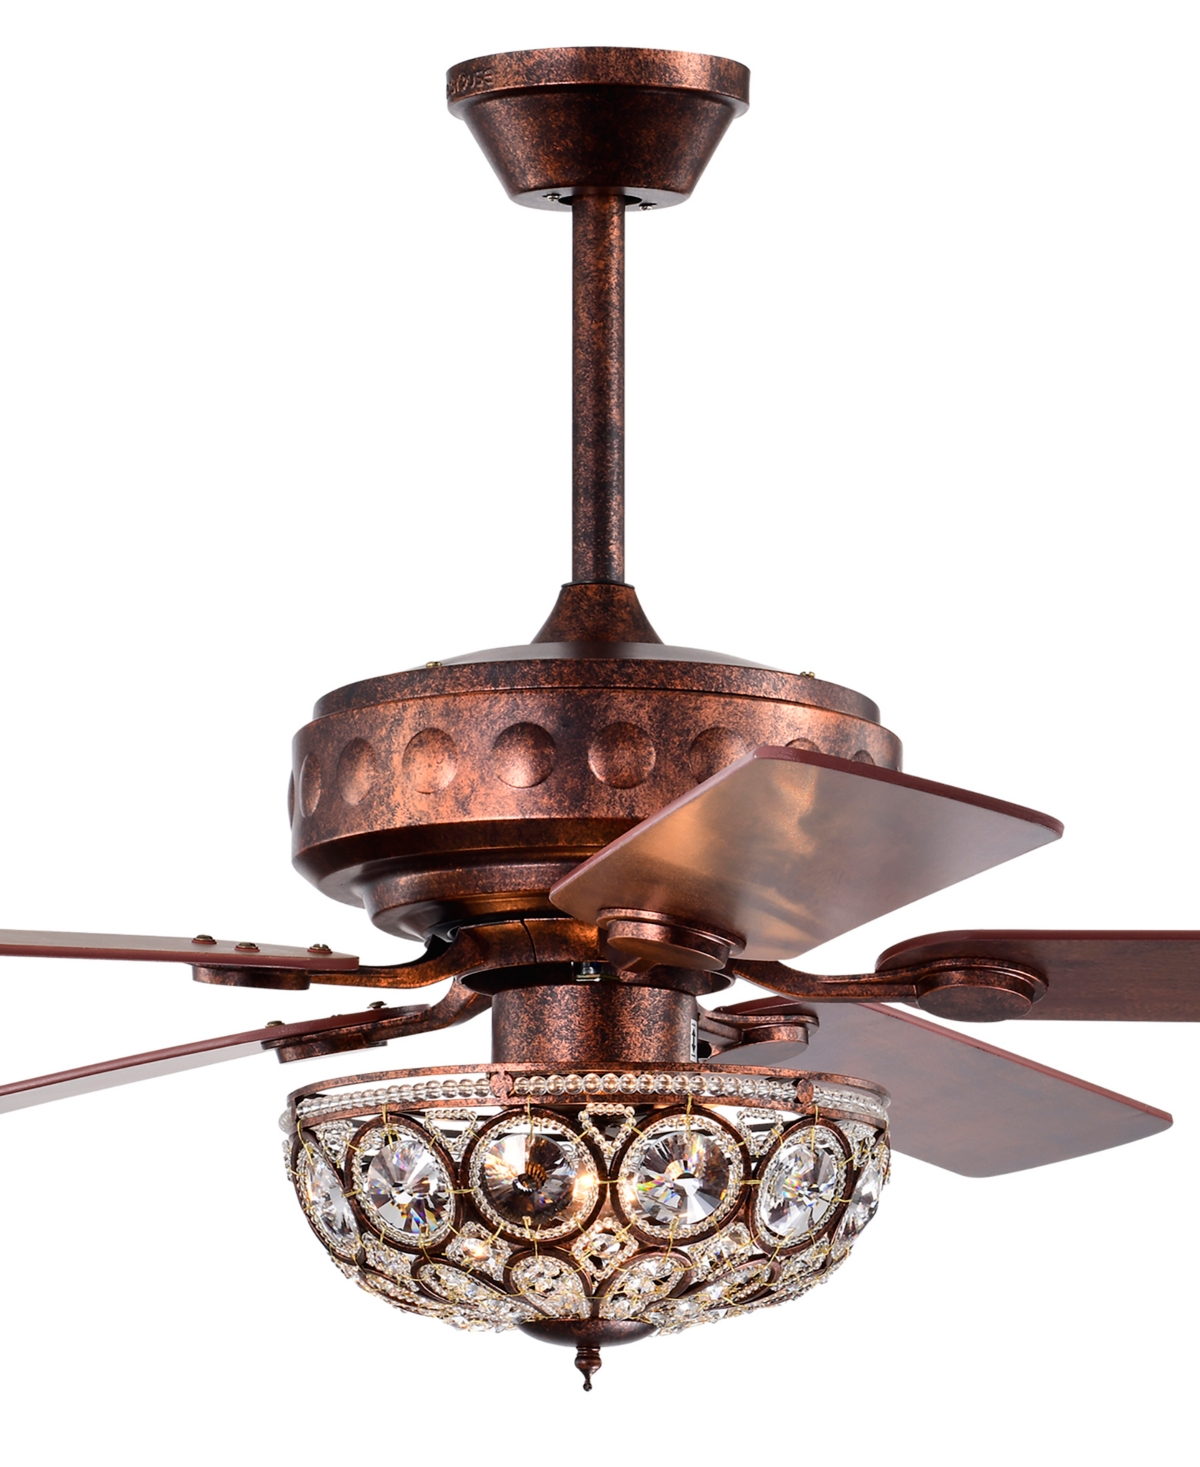 Home Accessories Jasiah 52" 3-light Indoor Ceiling Fan With Light Kit In Antique Copper